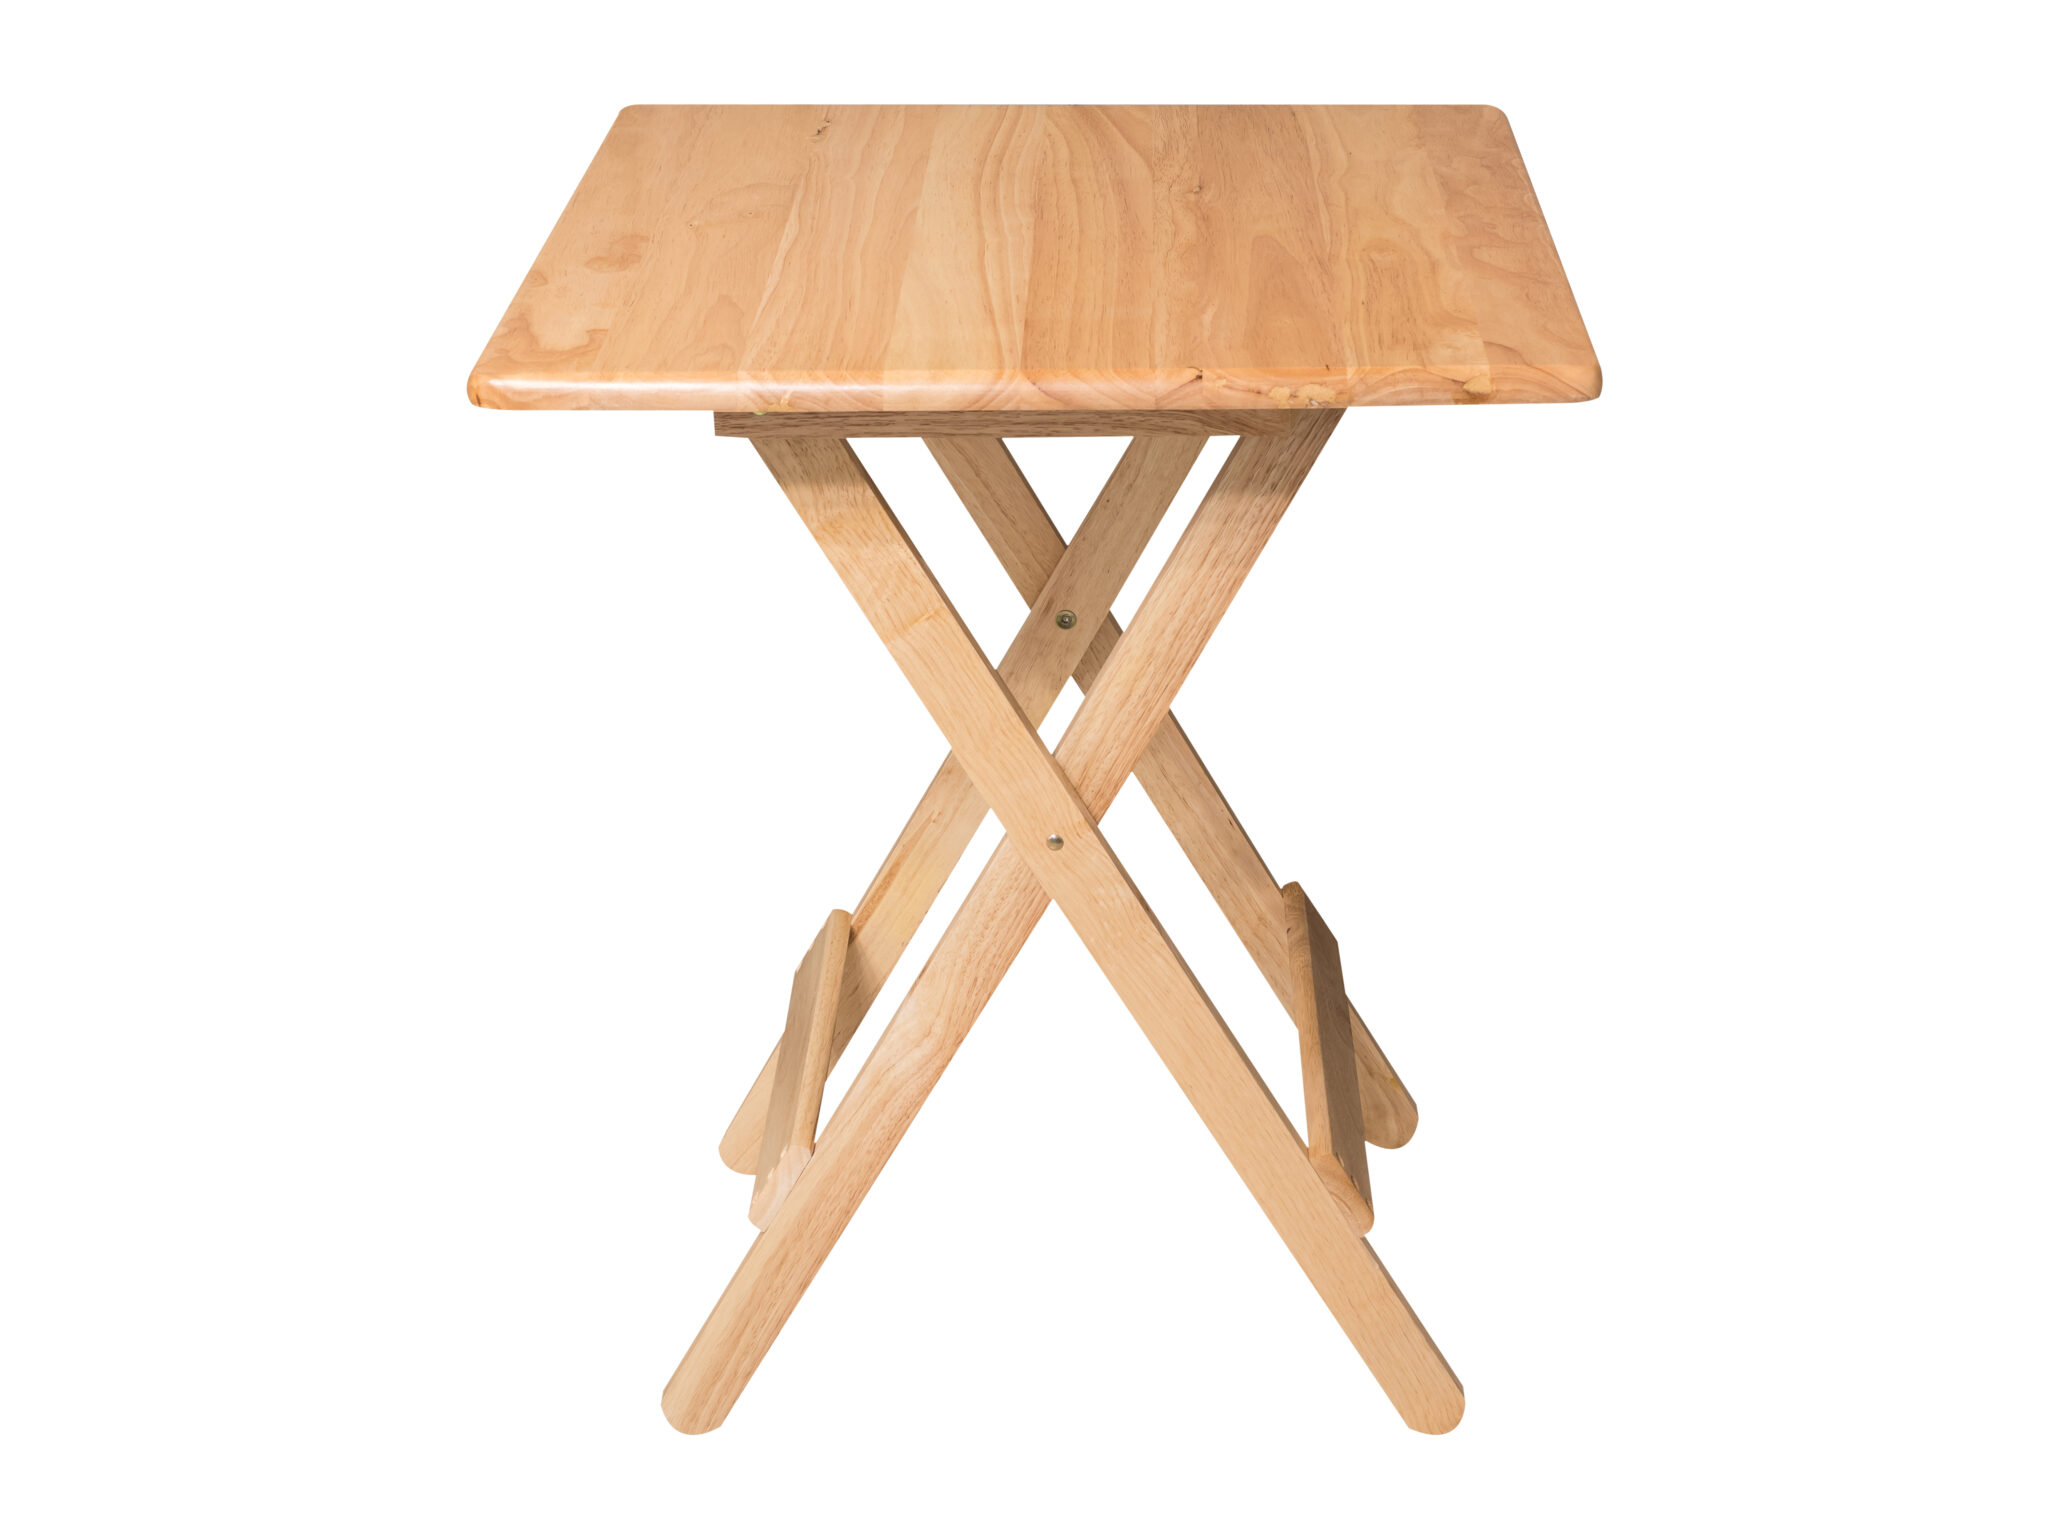 How to make a folding table 